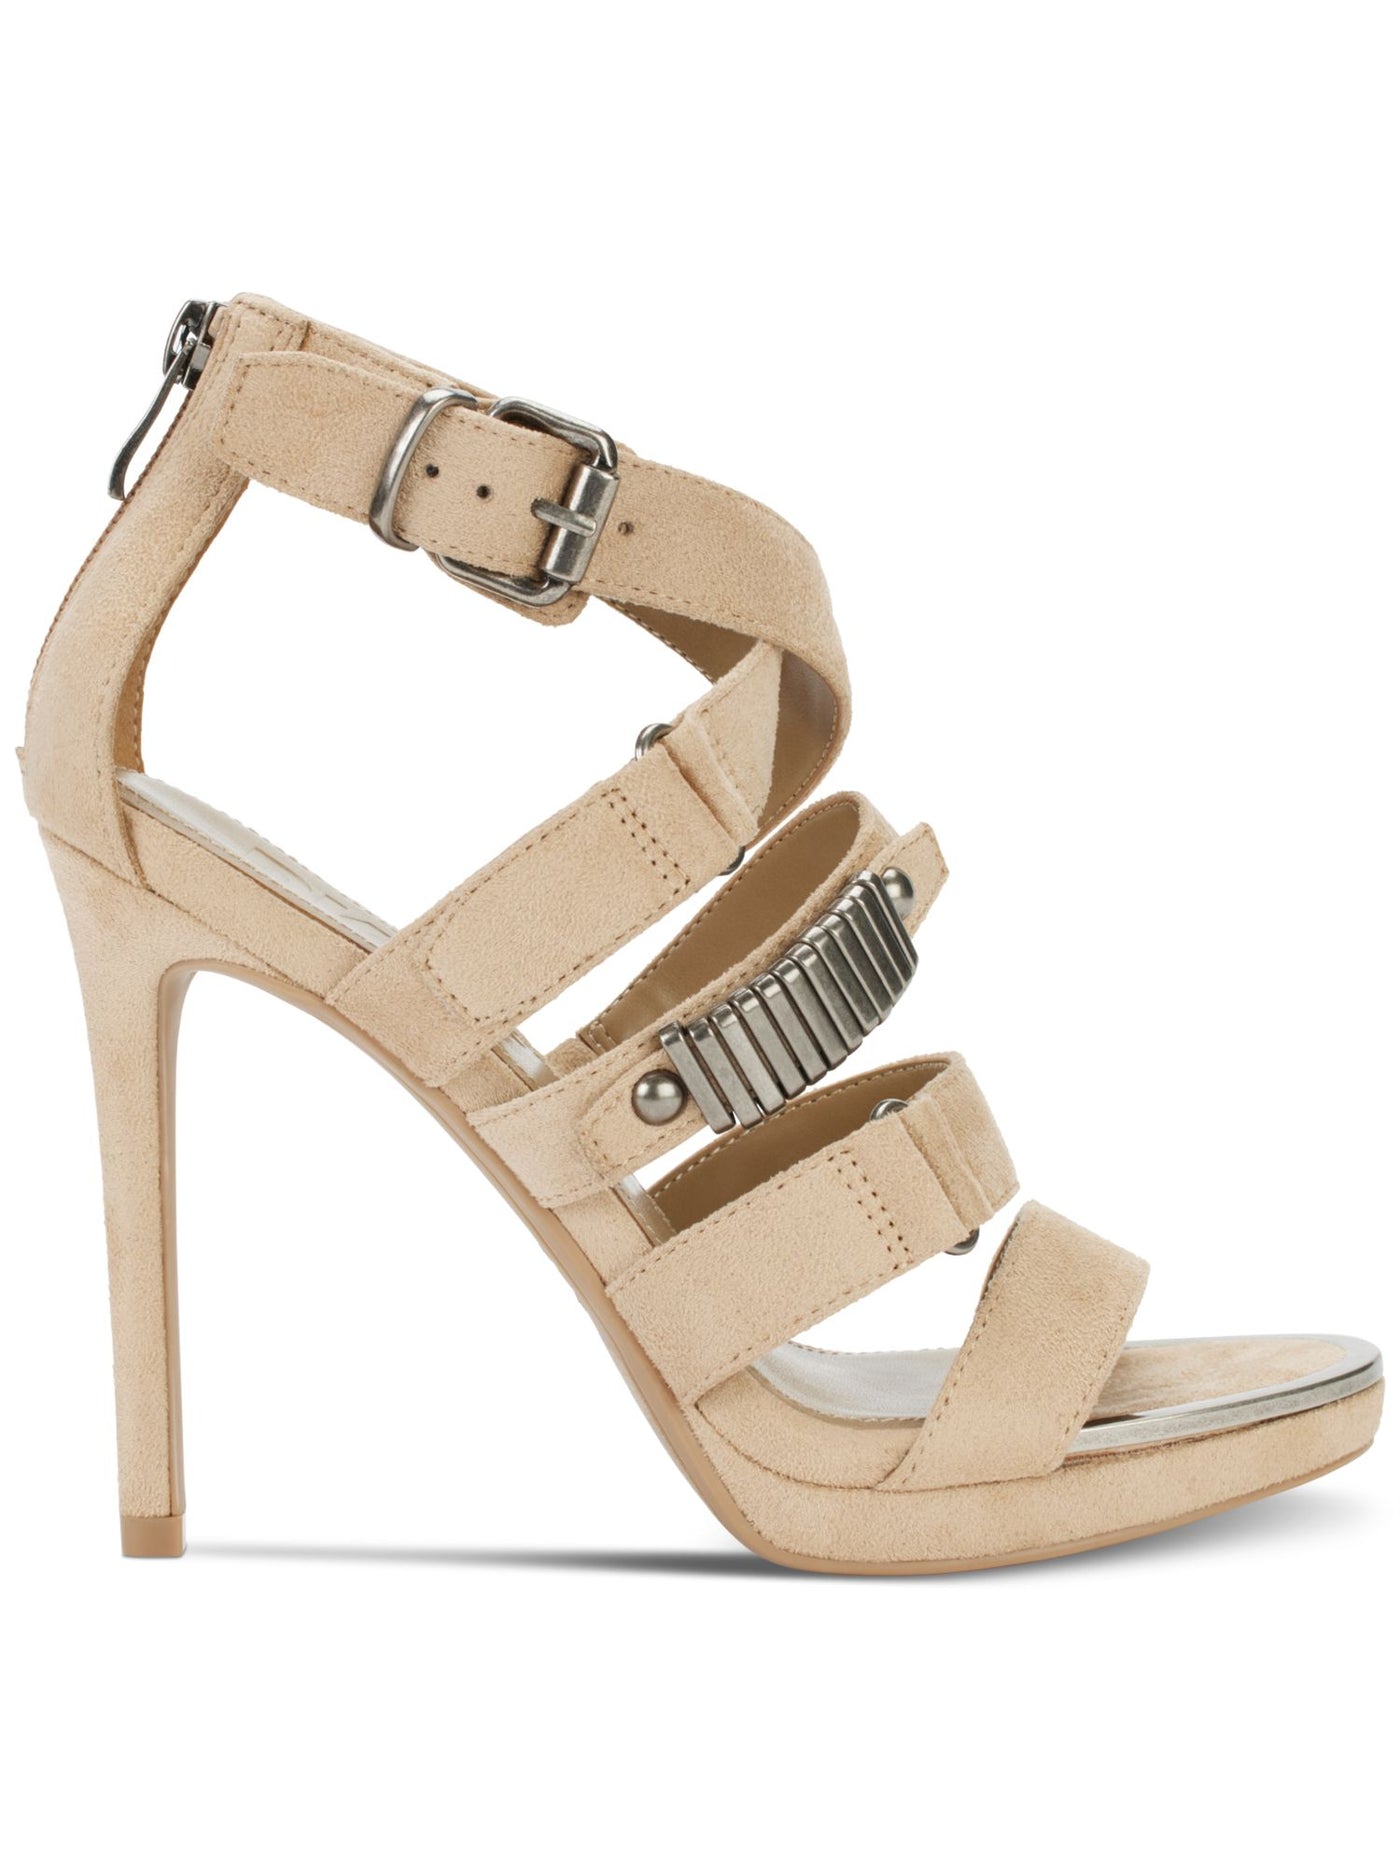 DKNY Womens Beige Buckled Strap Metallic Accent Padded Strappy Goring Deb Almond Toe Stiletto Zip-Up Heeled Sandal 9.5 M